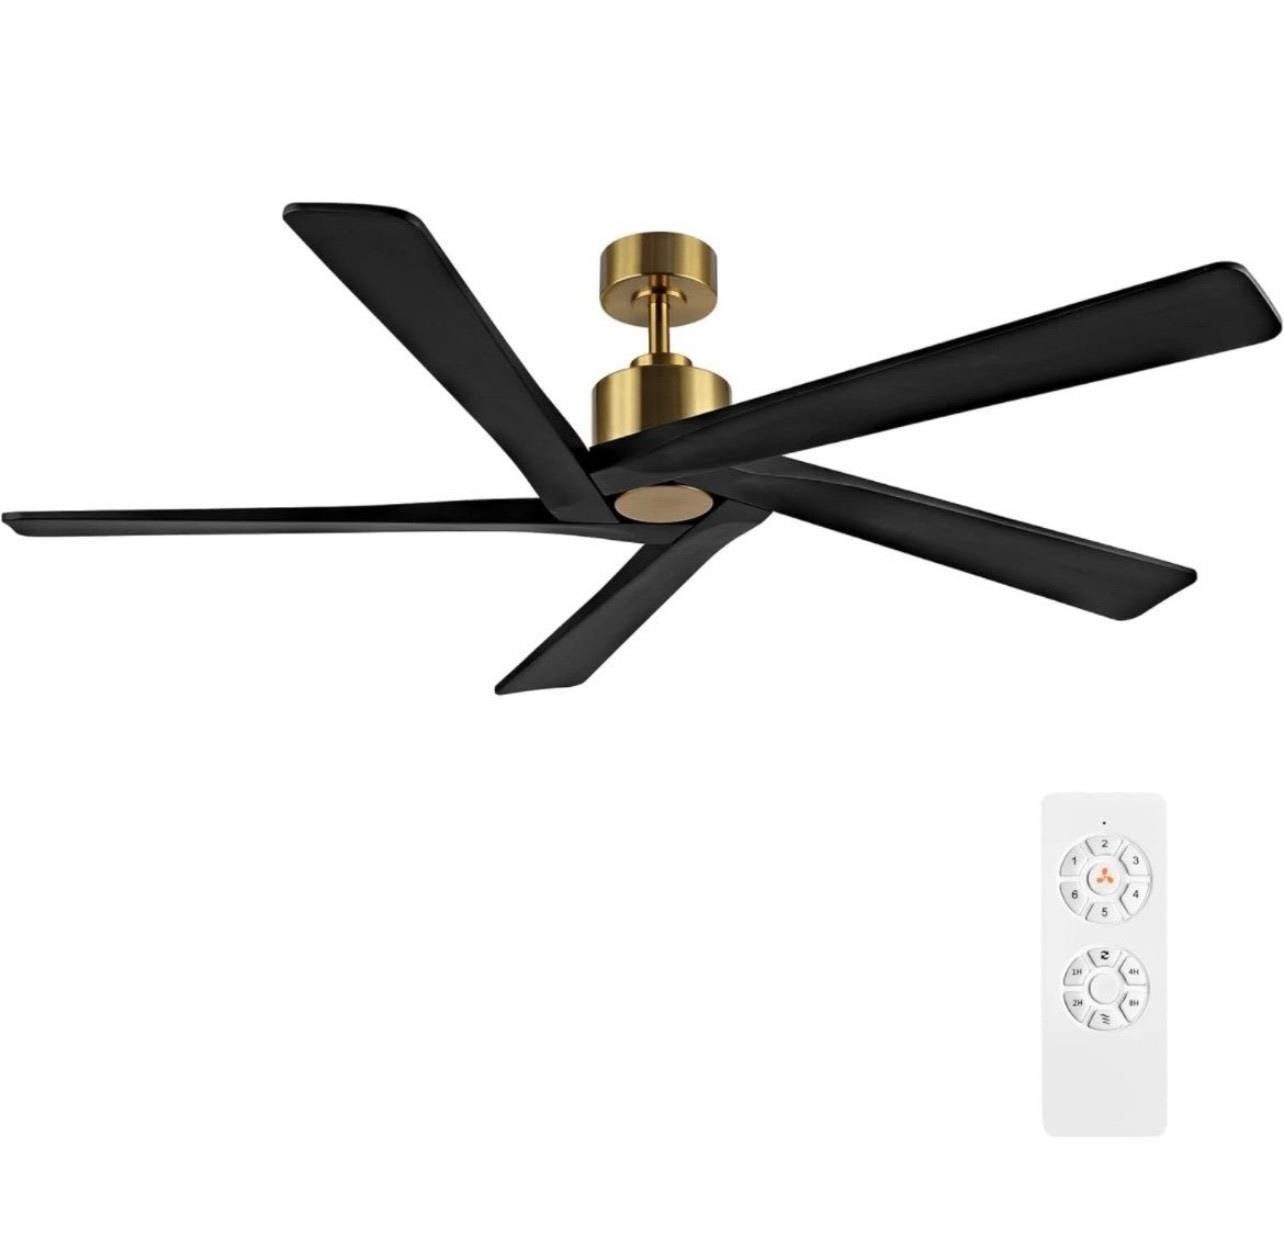 WINGBO 64 Inch DC Ceiling Fan without Lights